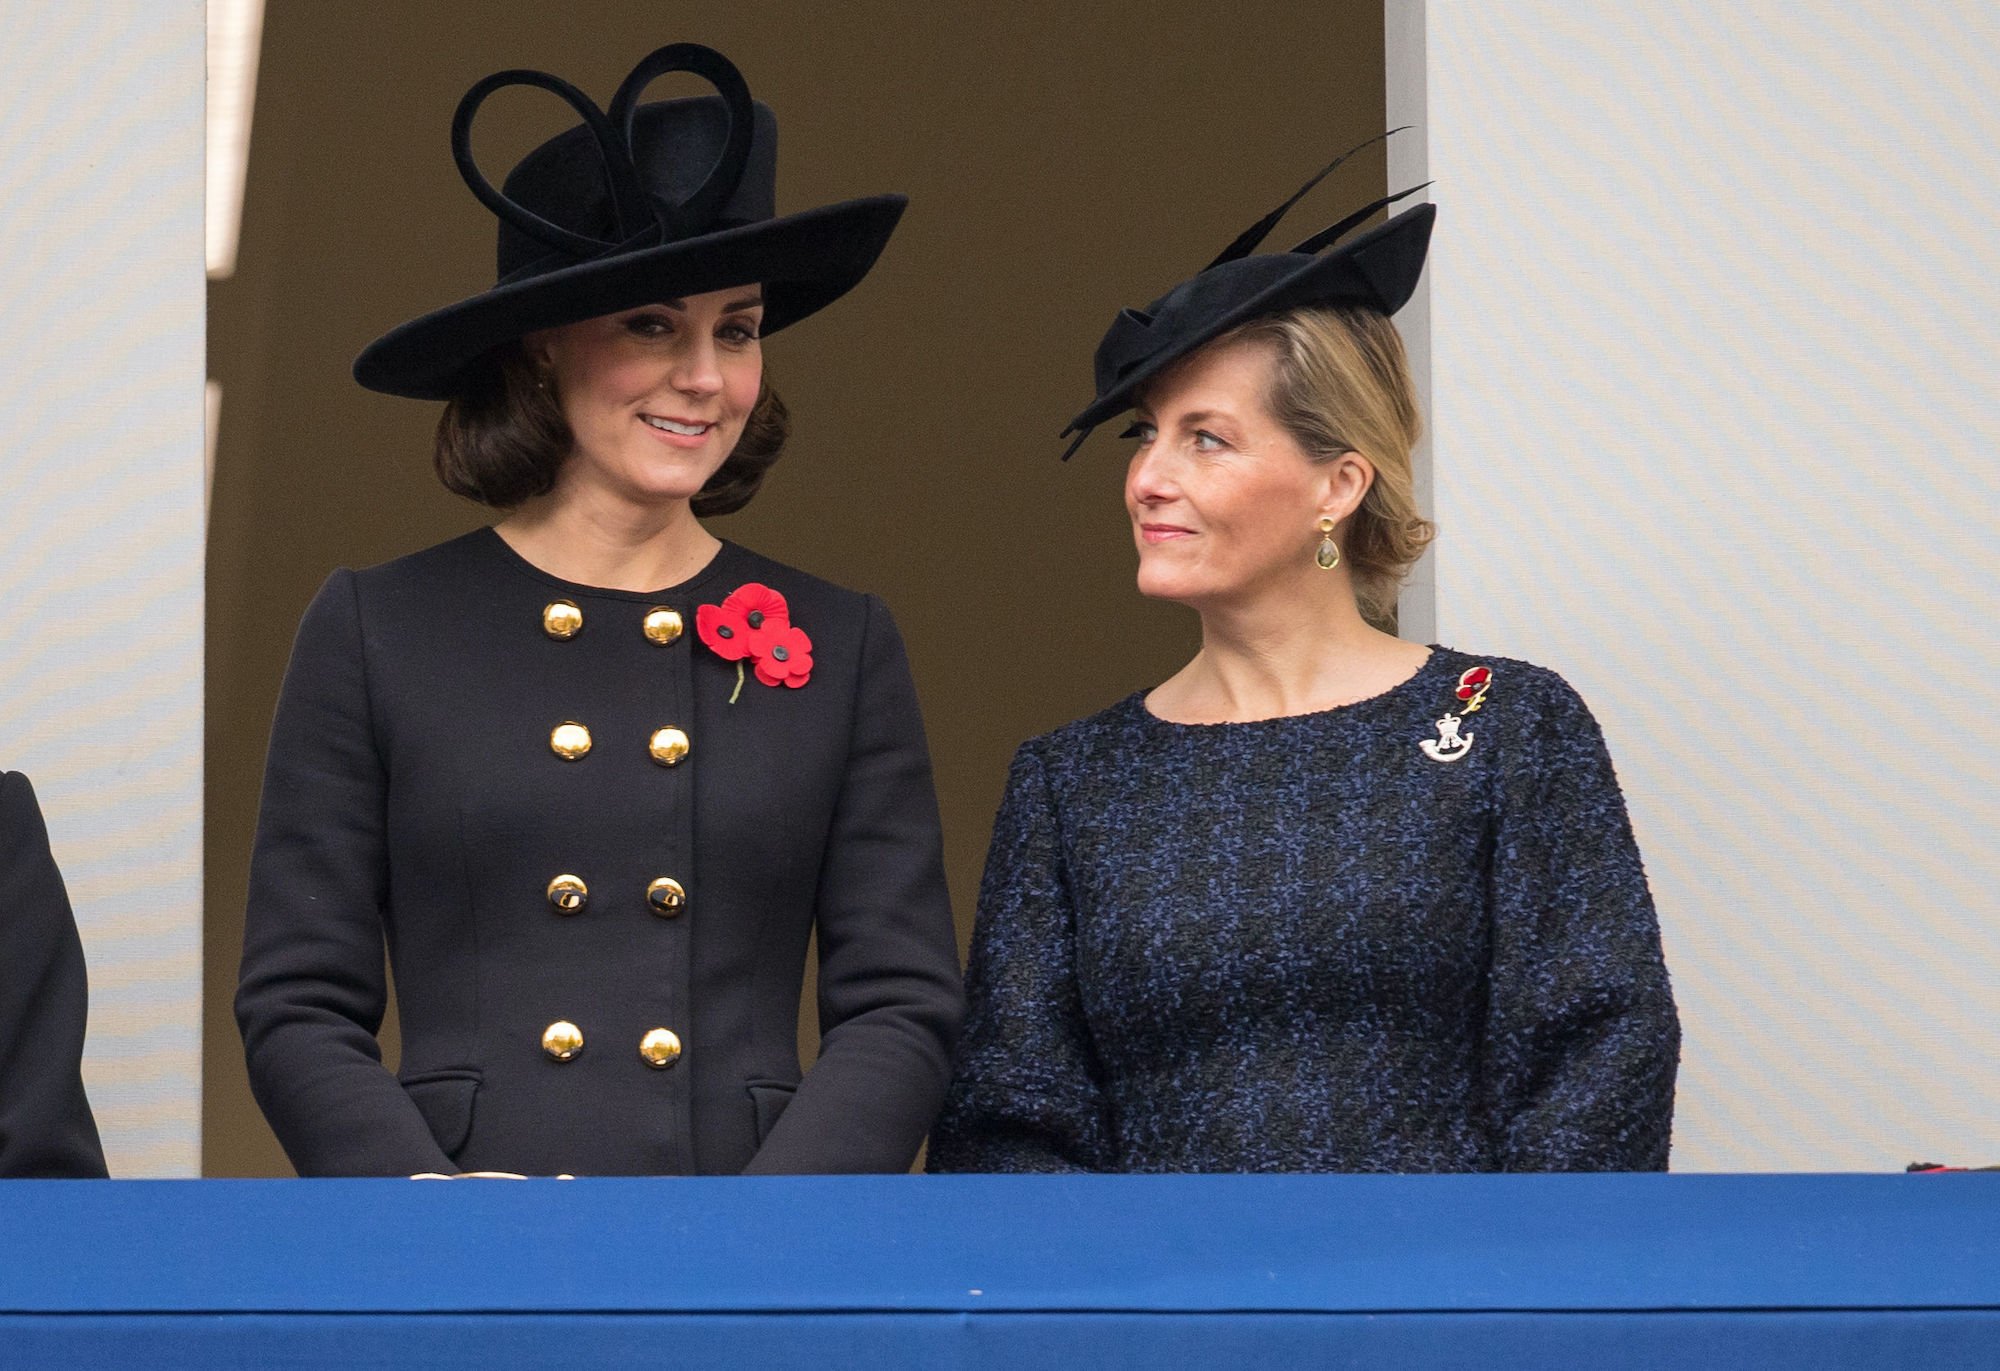 Kate Middleton and the Countess of Wessex Are ‘Closer Than Ever’ Amid Royal Family Drama